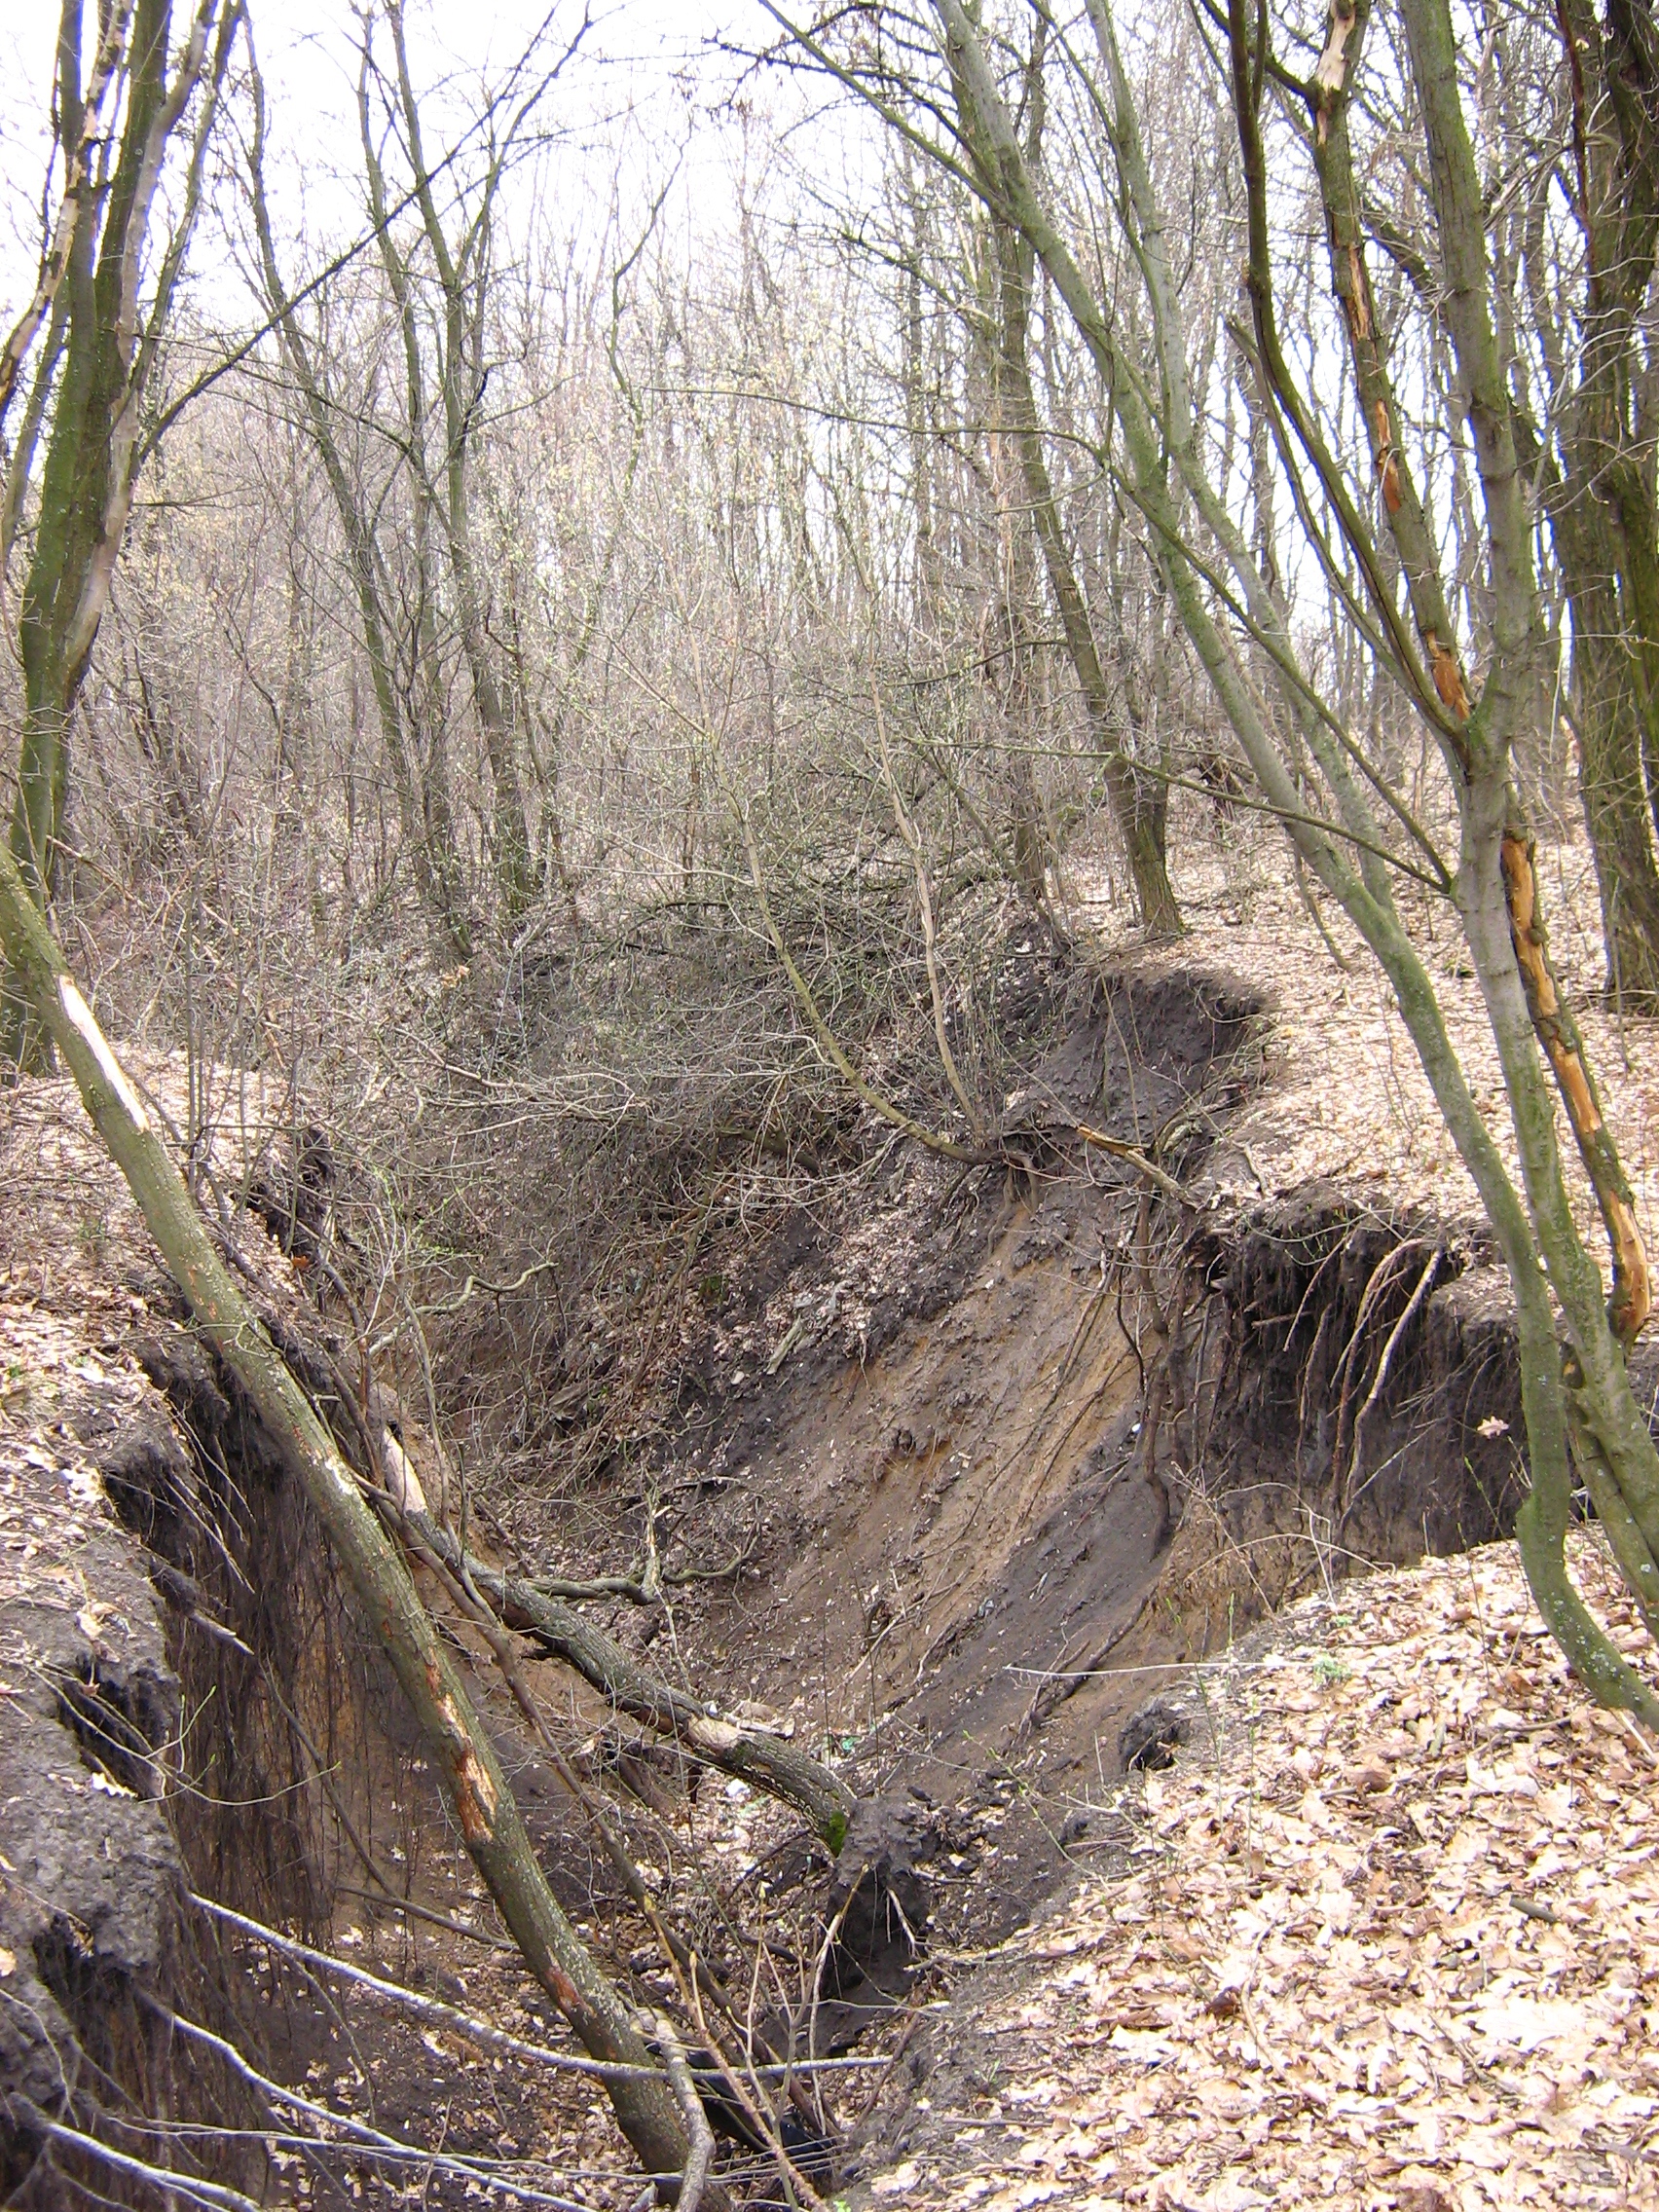 http://dic.academic.ru/pictures/wiki/files/71/Gully_in_the_Kharkov_region.jpg